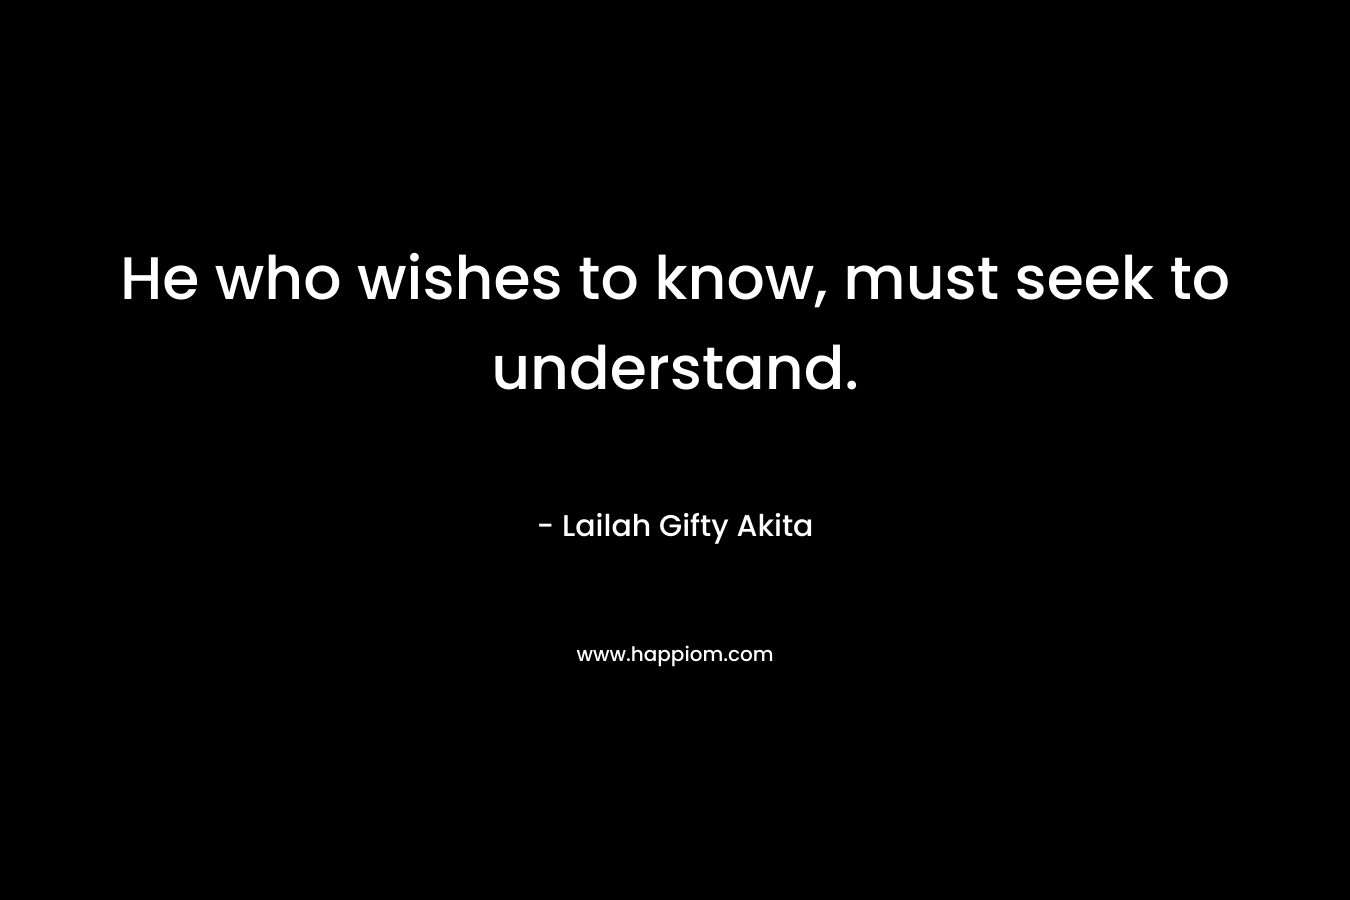 He who wishes to know, must seek to understand.